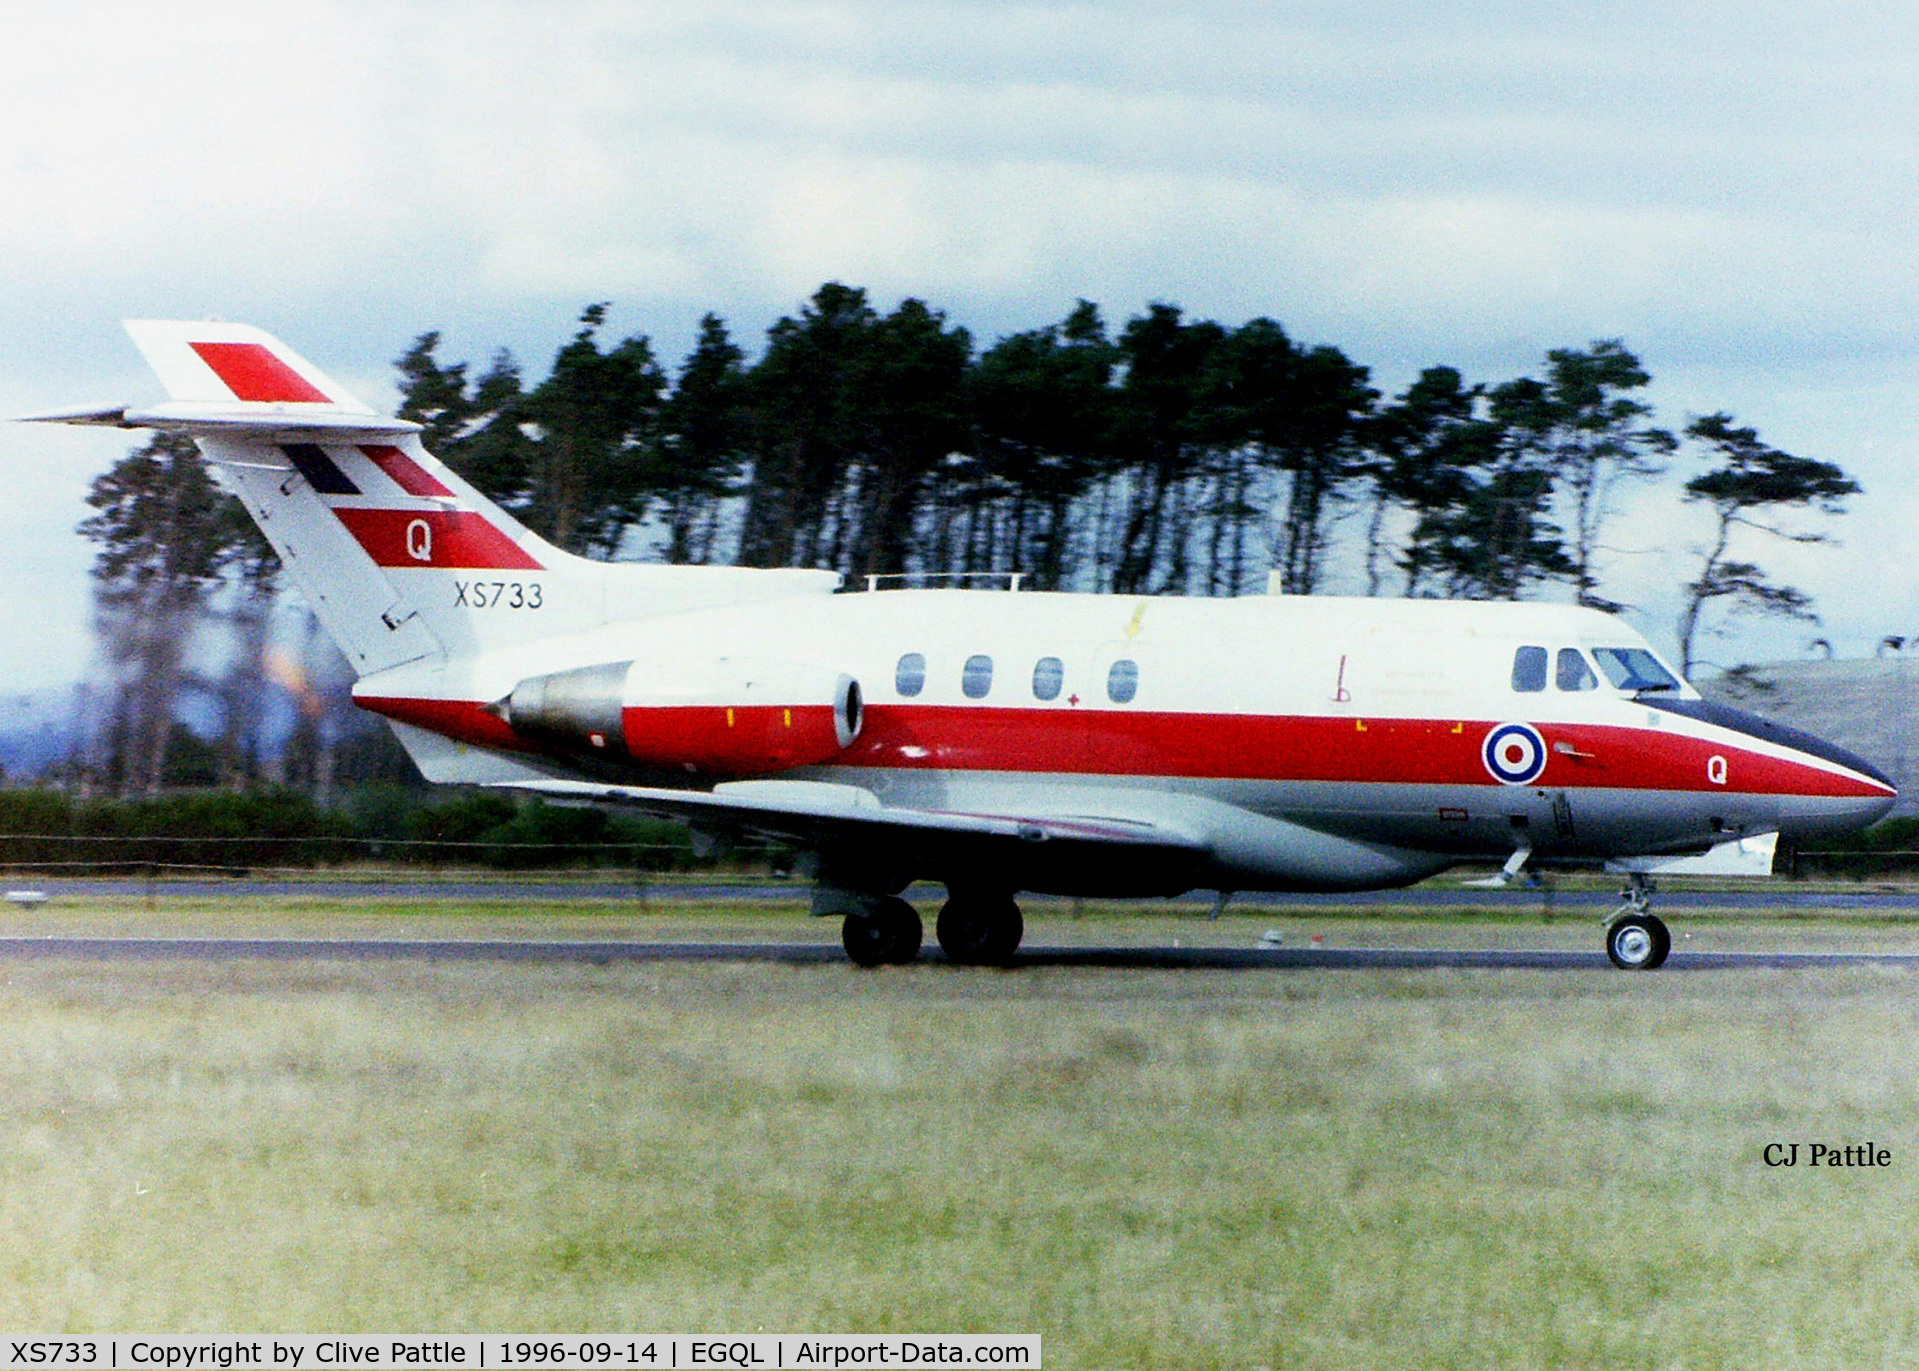 XS733, 1966 Hawker Siddeley HS.125 Dominie T.1 C/N 25059, Arrival at RAF Leuchars for the airshow 1996